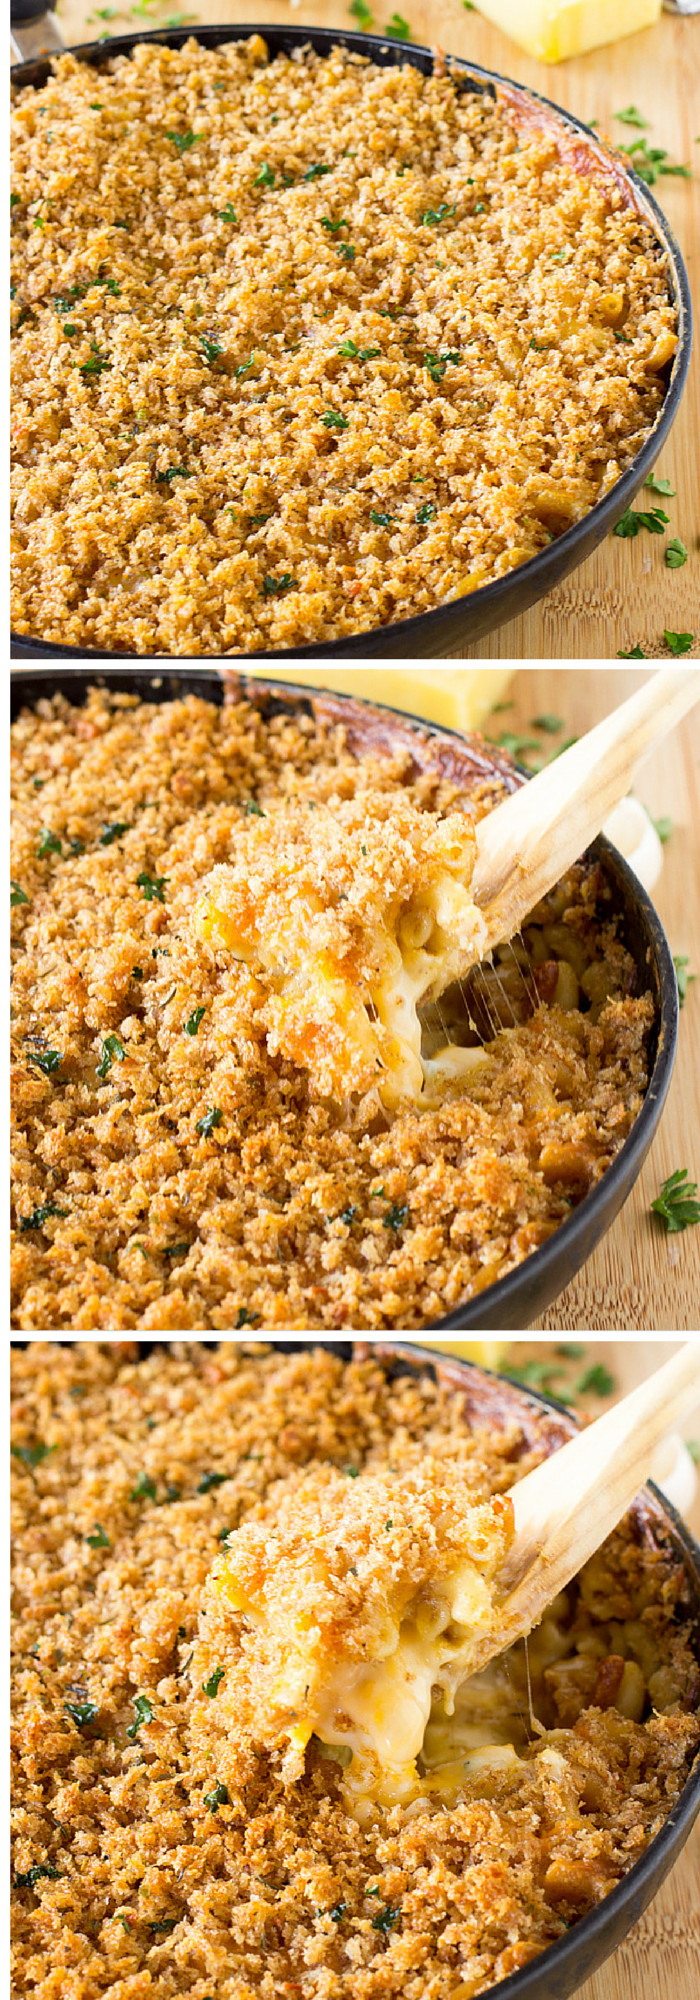 3 Cheese Baked Macaroni And Cheese Recipe
 This e Skillet Three Cheese Baked Macaroni and Cheese is